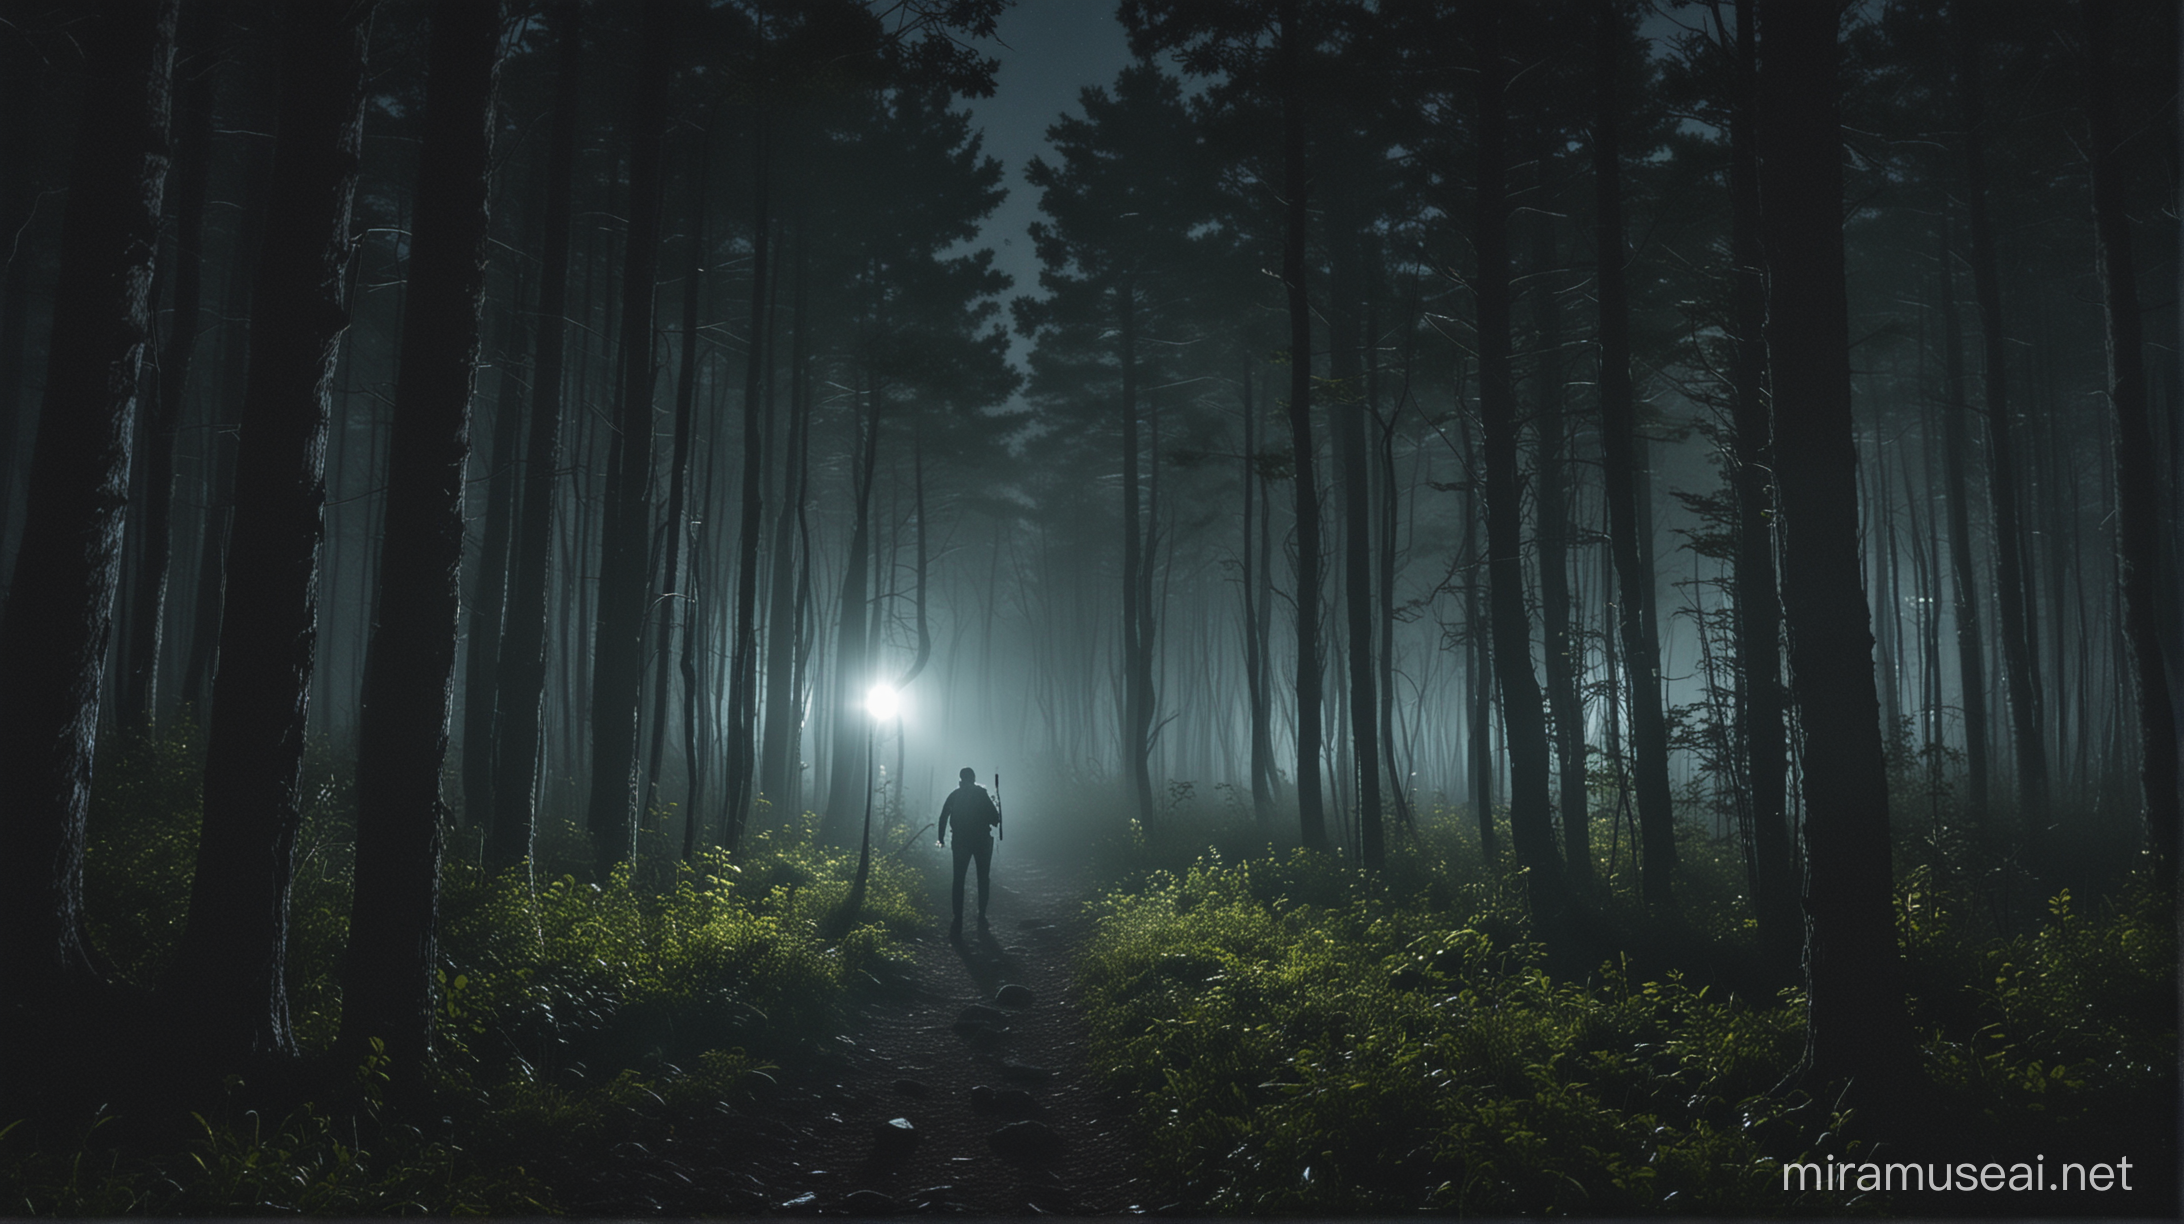 /imagine prompt: A lone hiker trekking through a dense forest at night, their flashlight illuminating the path ahead, casting eerie shadows on the trees, a sense of anticipation and adventure in the air, Photography, DSLR camera with a wide-angle lens, f/2.8 aperture, --ar 16:9 --v 5